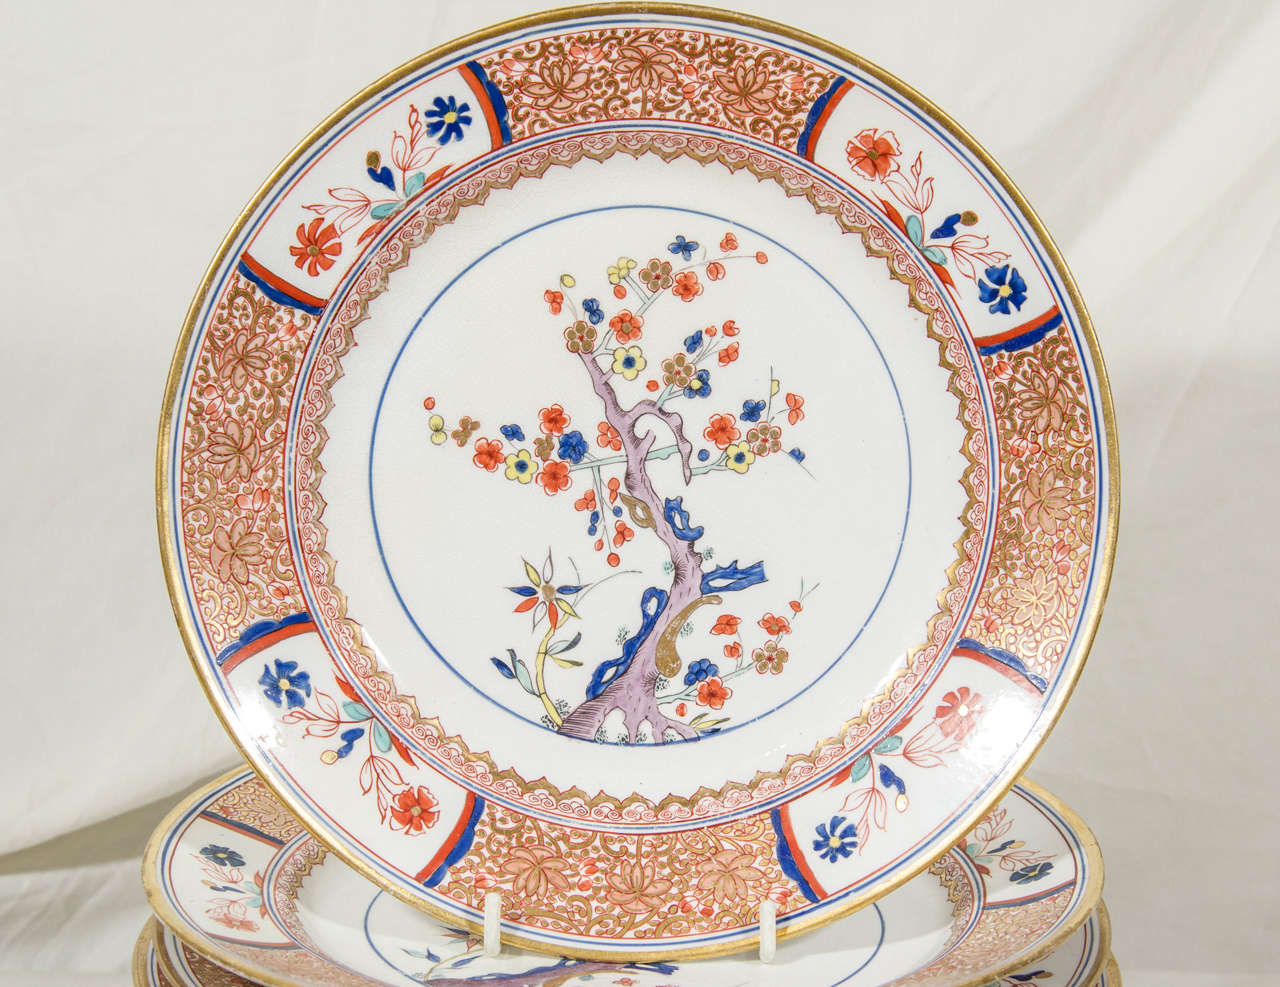 Painted with a traditional Kakiemon theme of a springtime flowering plum tree. In the Kakiemon style of bright colors painted with enamels on a pure white porcelain body with large amounts of negative (empty) space which showcases the beauty of the